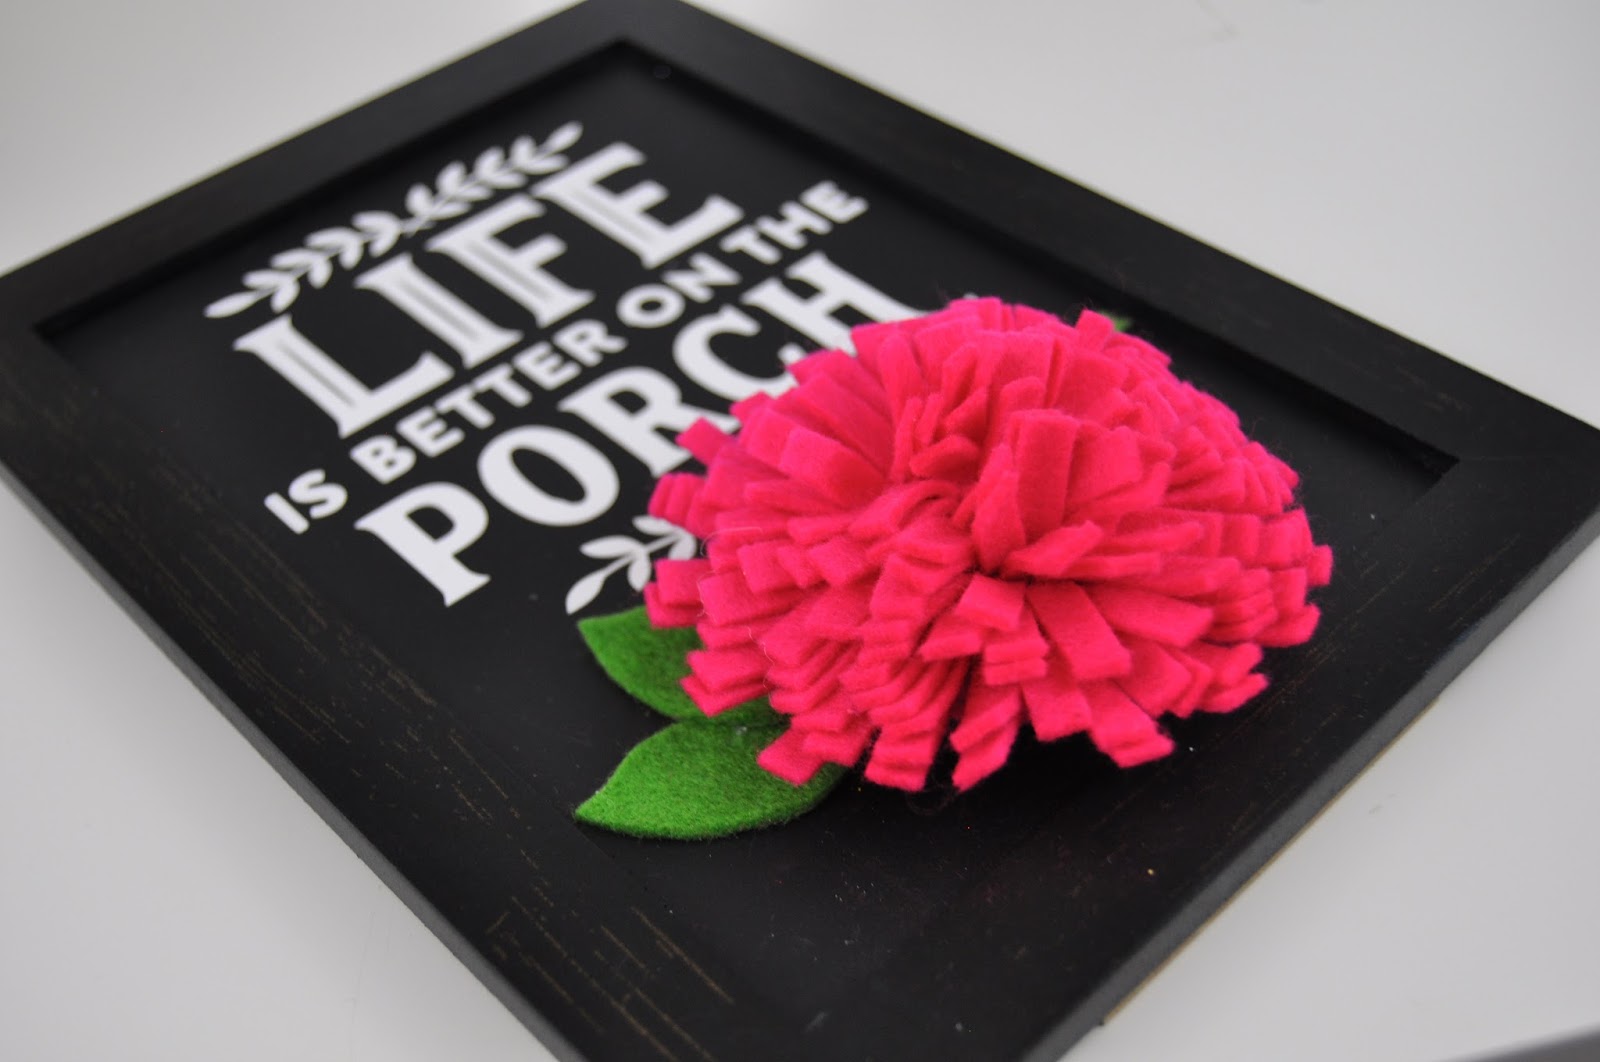 Porch chalkboard sign tutorial. Vinyl chalkboard porch sign. How to use vinyl to create a chalkboard sign for your porch with Jen Gallacher. #vinyl #chalkboard #jengallacher #jillibeansoup